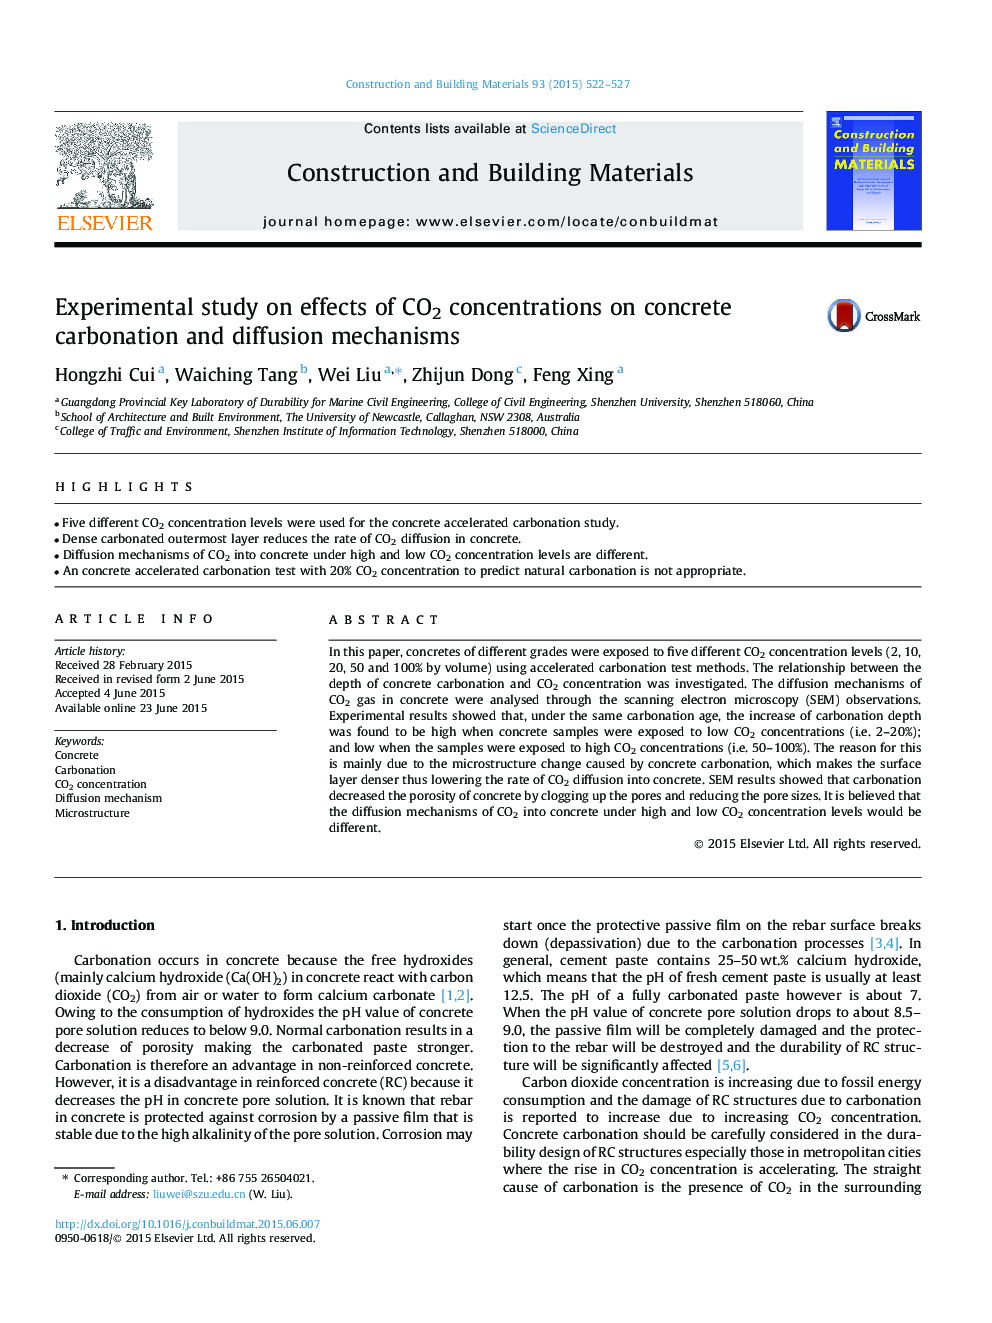 Experimental study on effects of CO2 concentrations on concrete carbonation and diffusion mechanisms